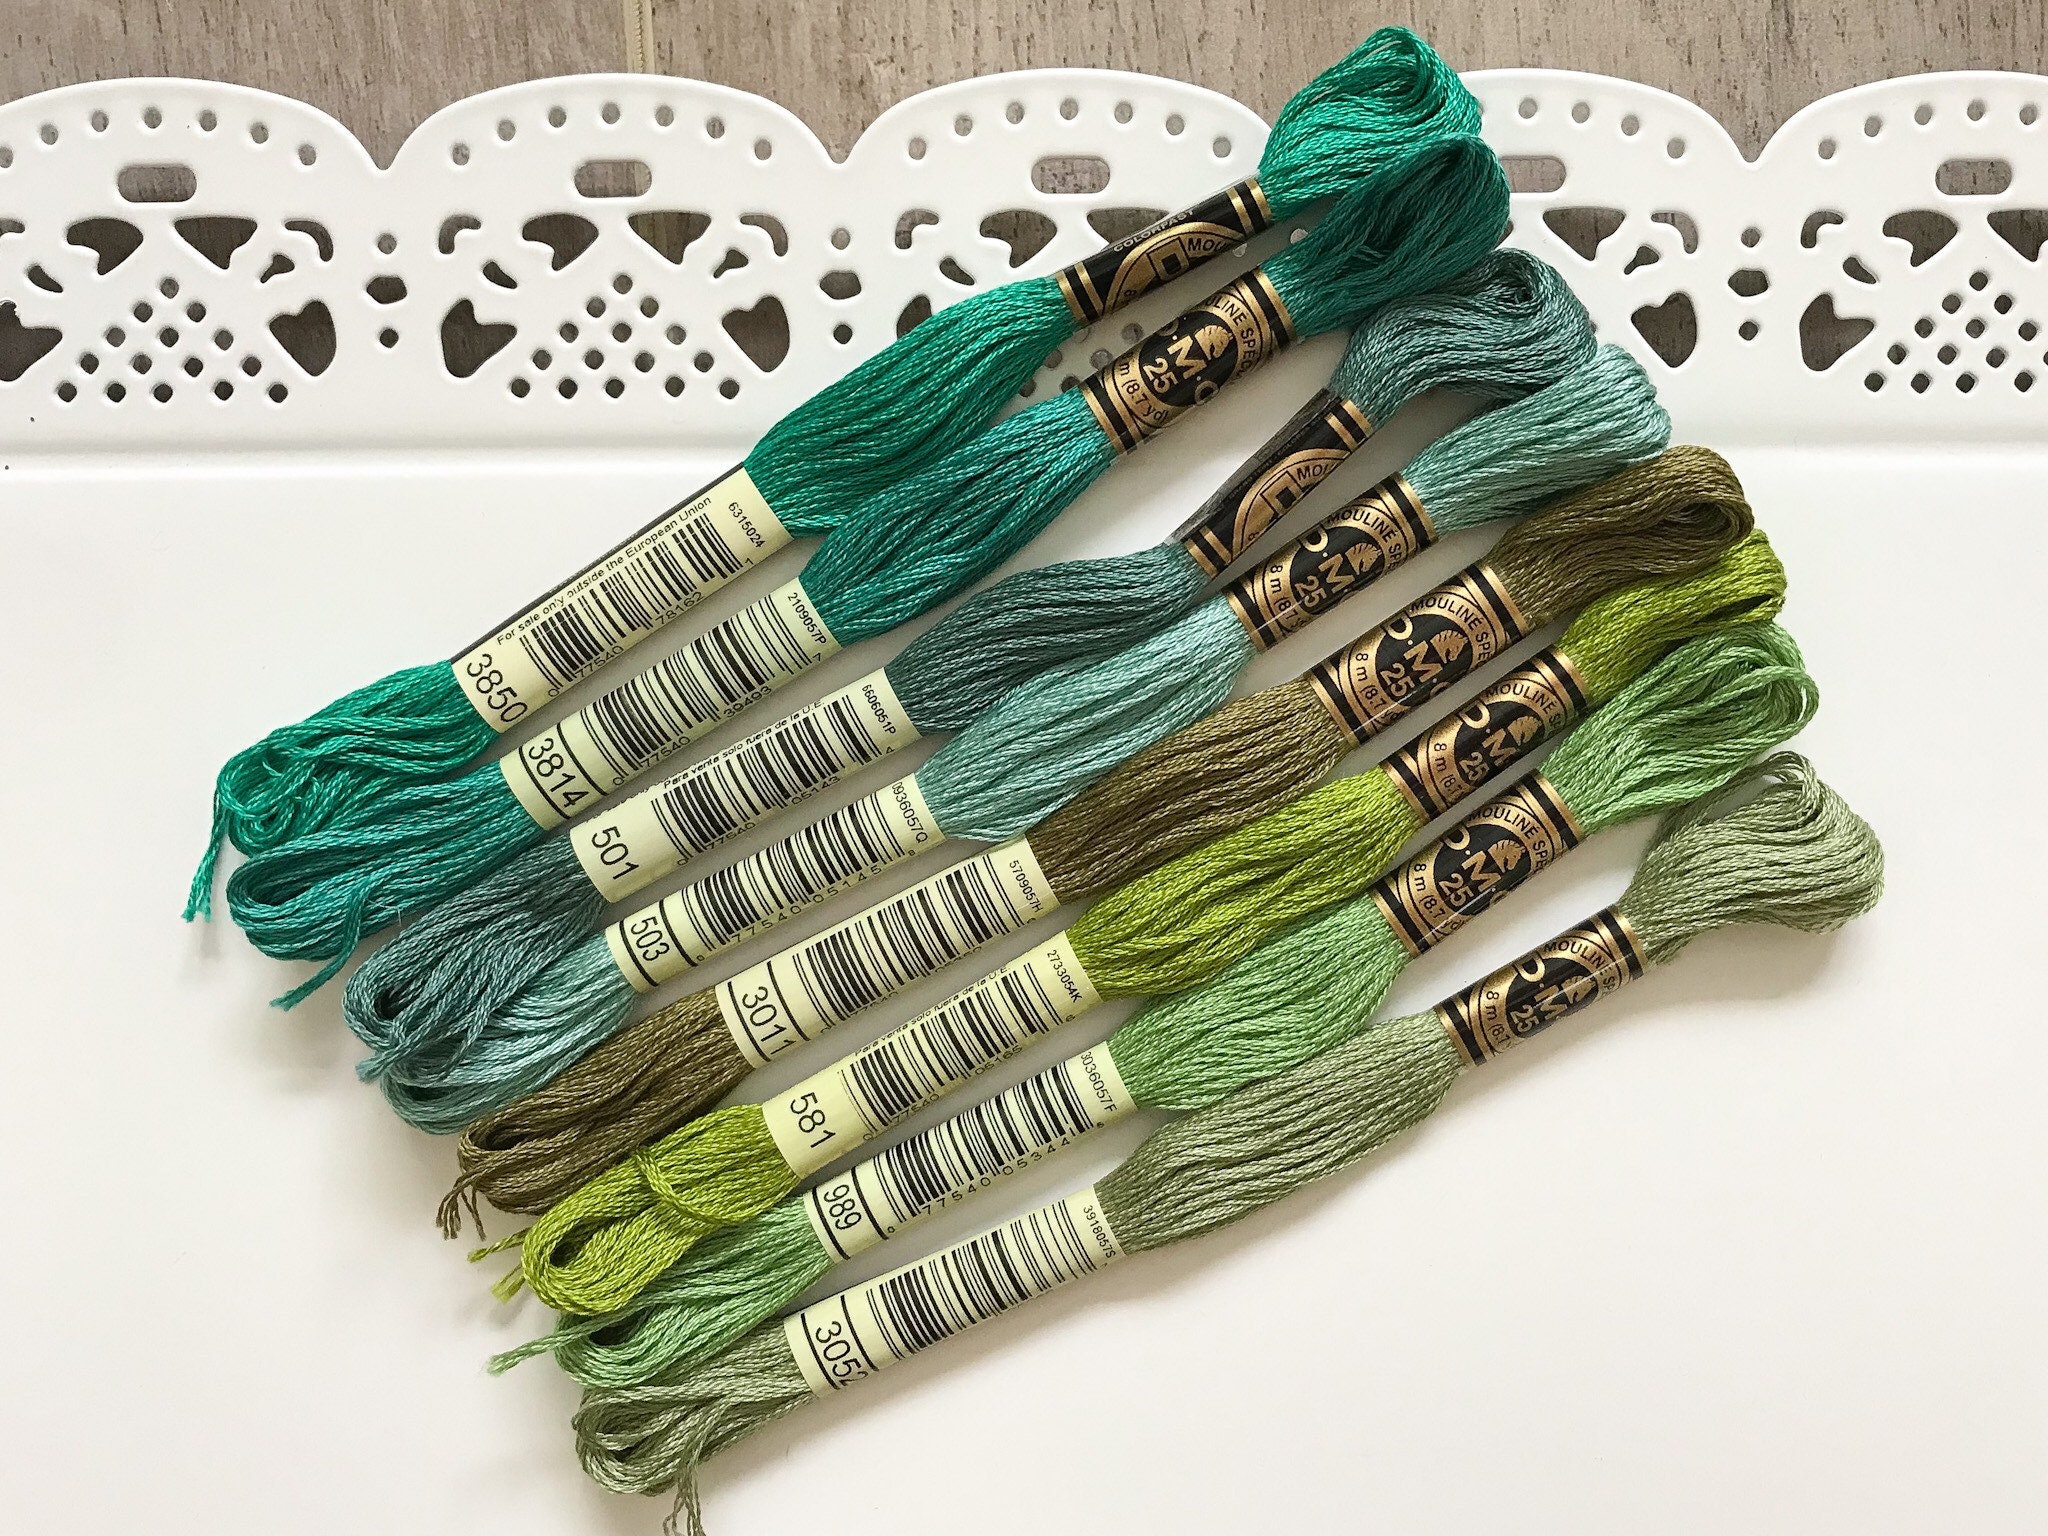 THINK GREEN Embroidery Floss Set DMC Embroidery Thread Collection Floss Kit  for Hand Embroidery Cross Stitch Friendship Bracelets or Diy 